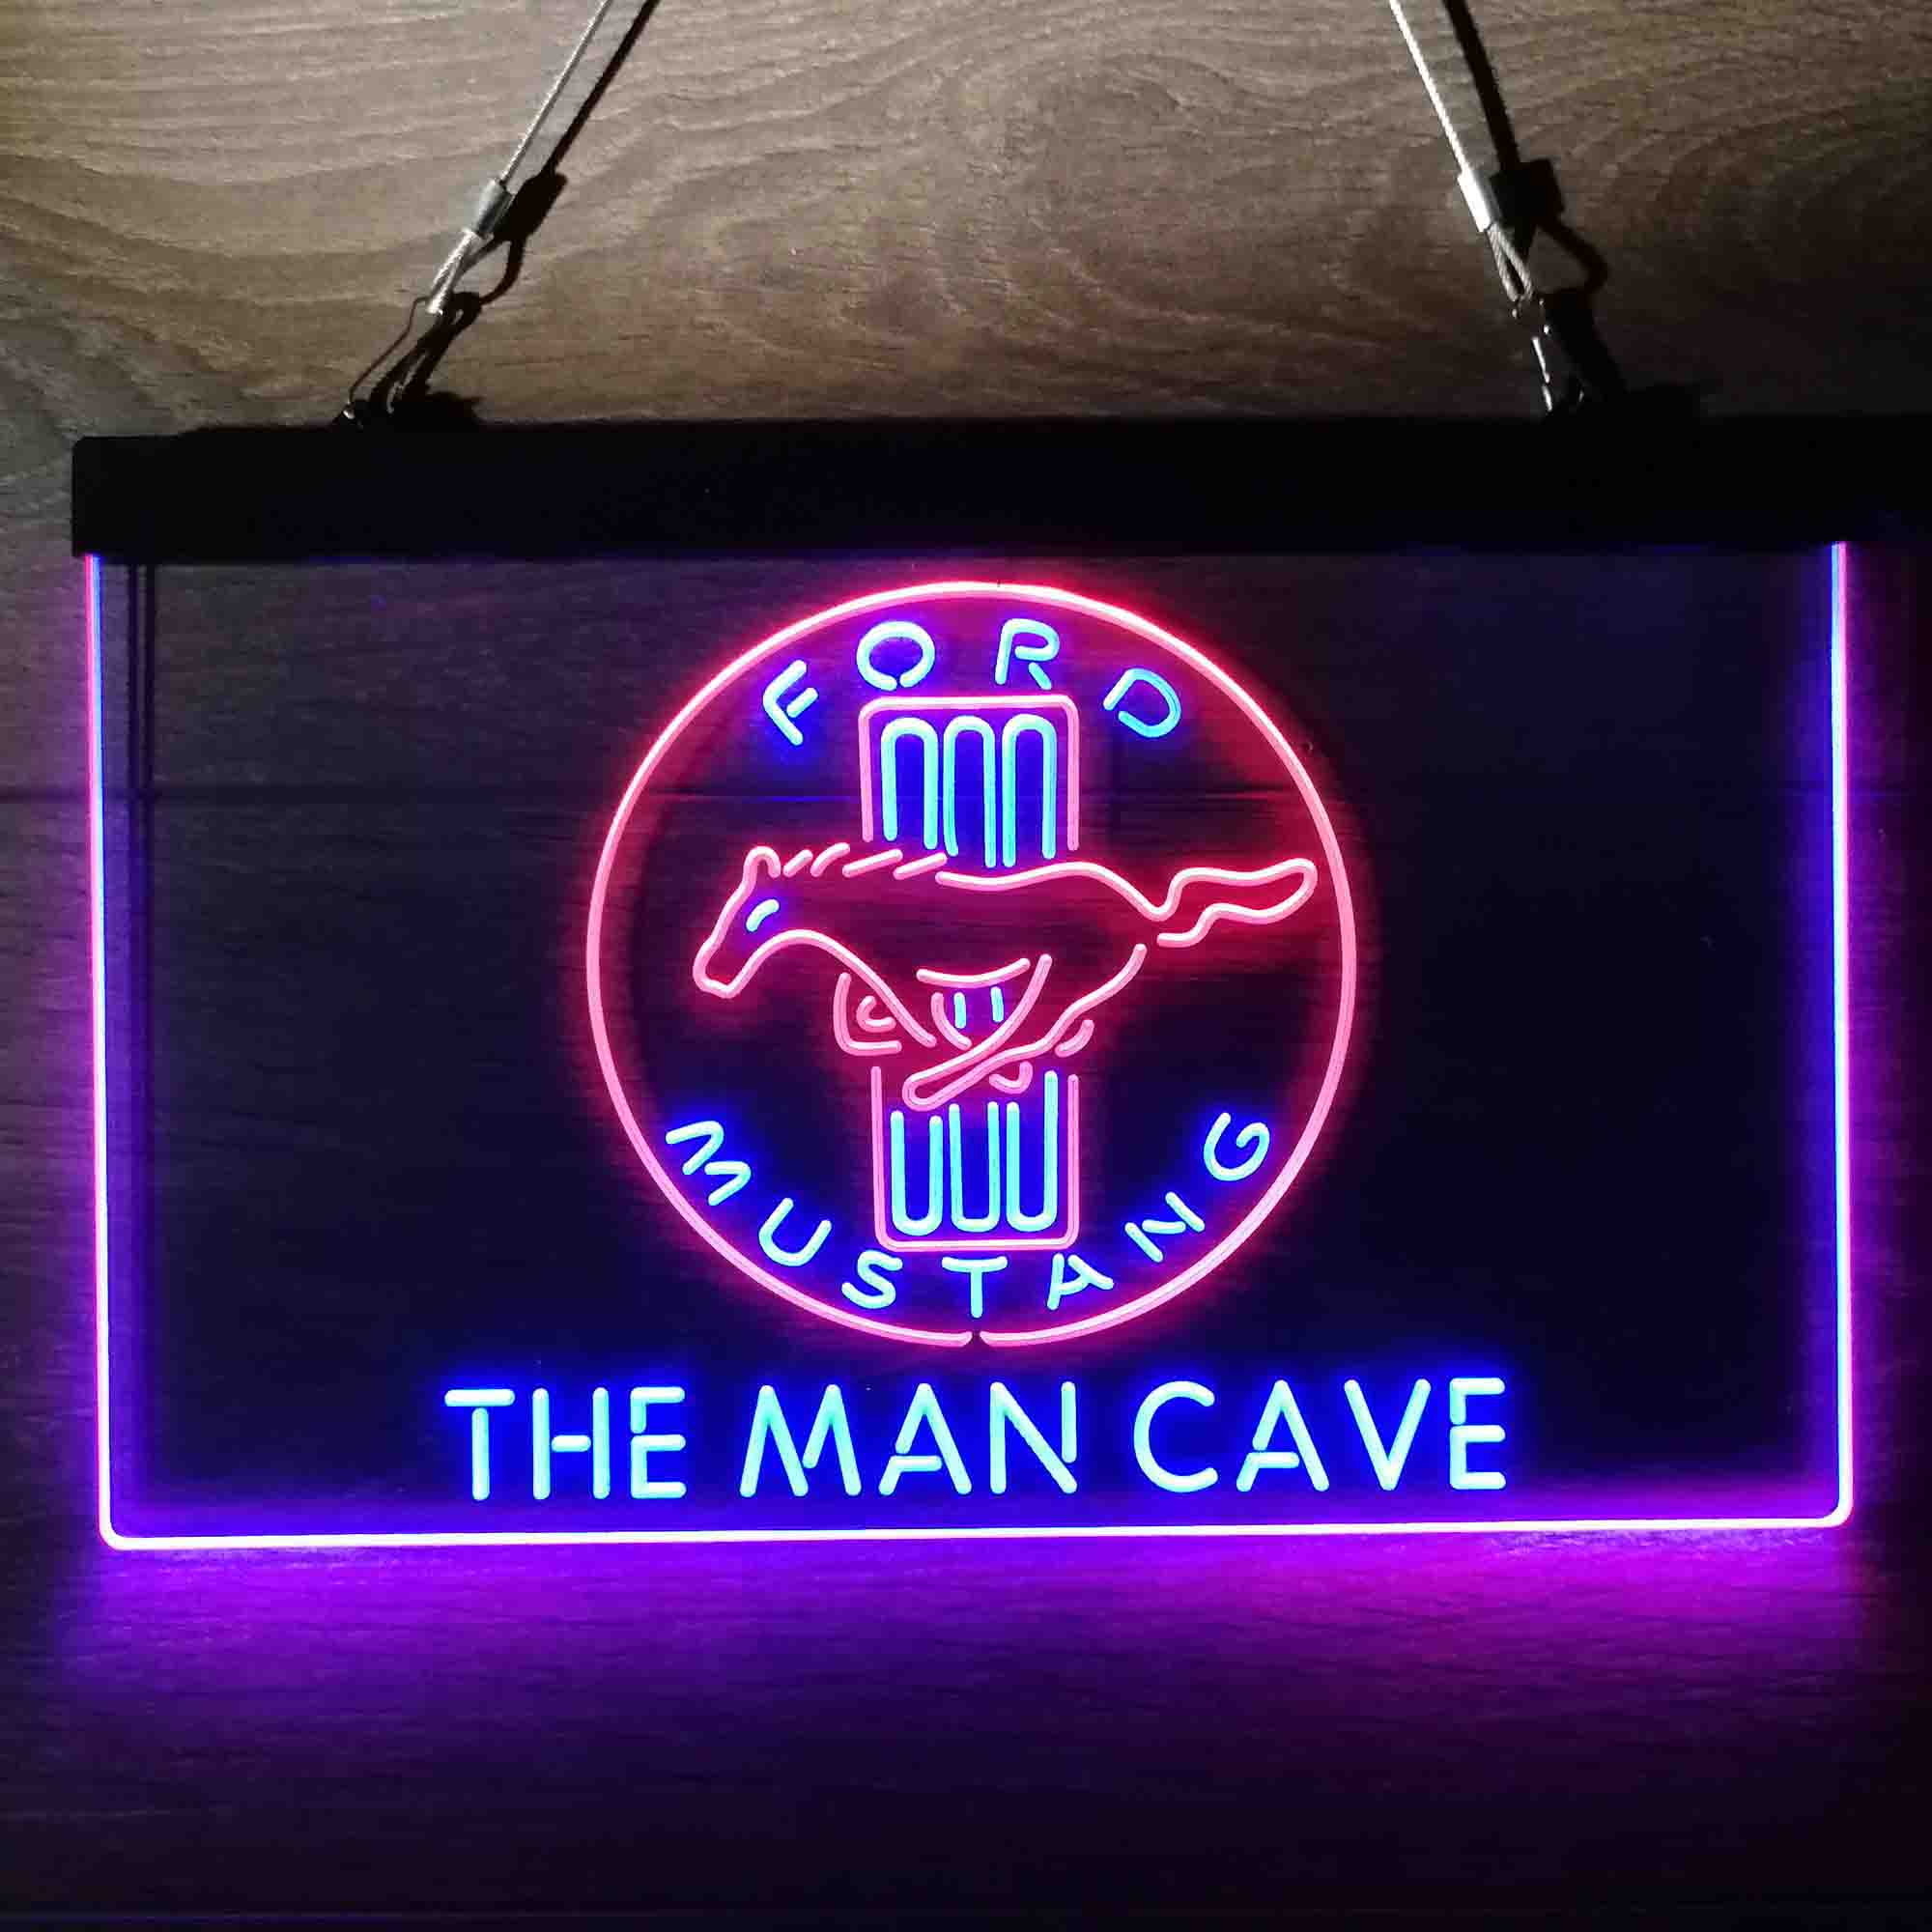 Ford Mustang Horse Car Bar Neon-like LED Sign - PRO LED SIGN!